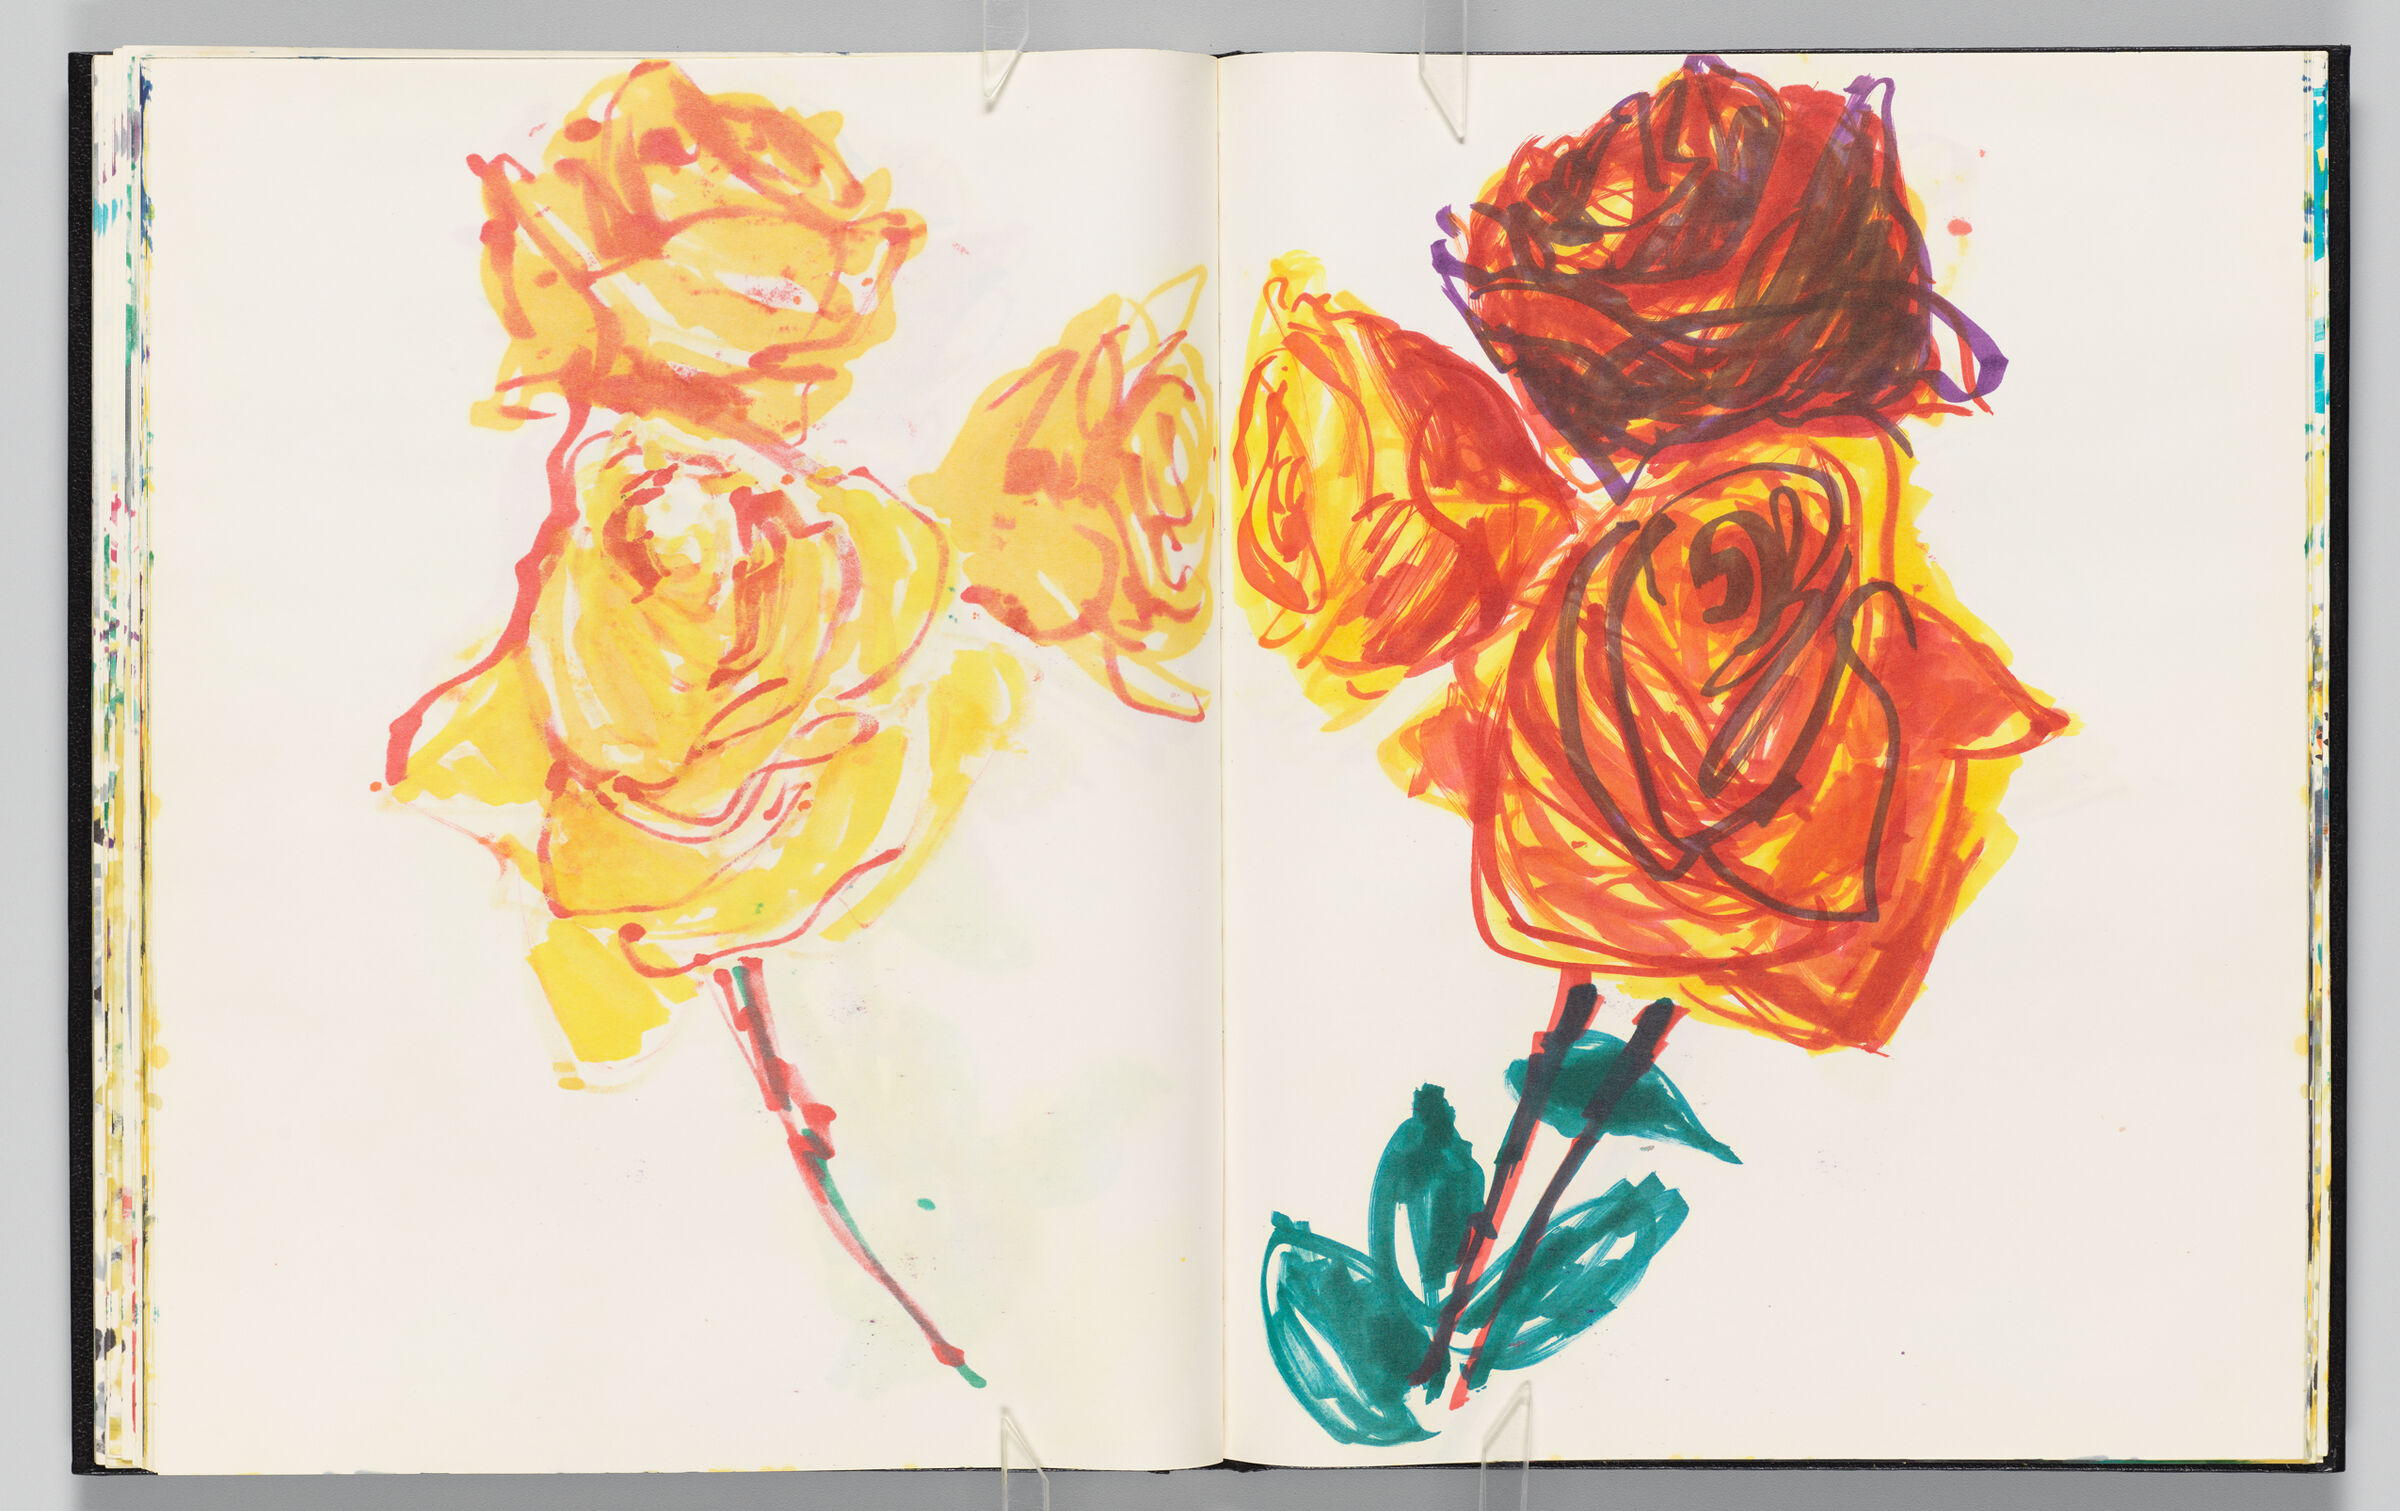 Untitled (Bleed-Through Of Previous Page, Left Page); Untitled (Flowers, Right Page)